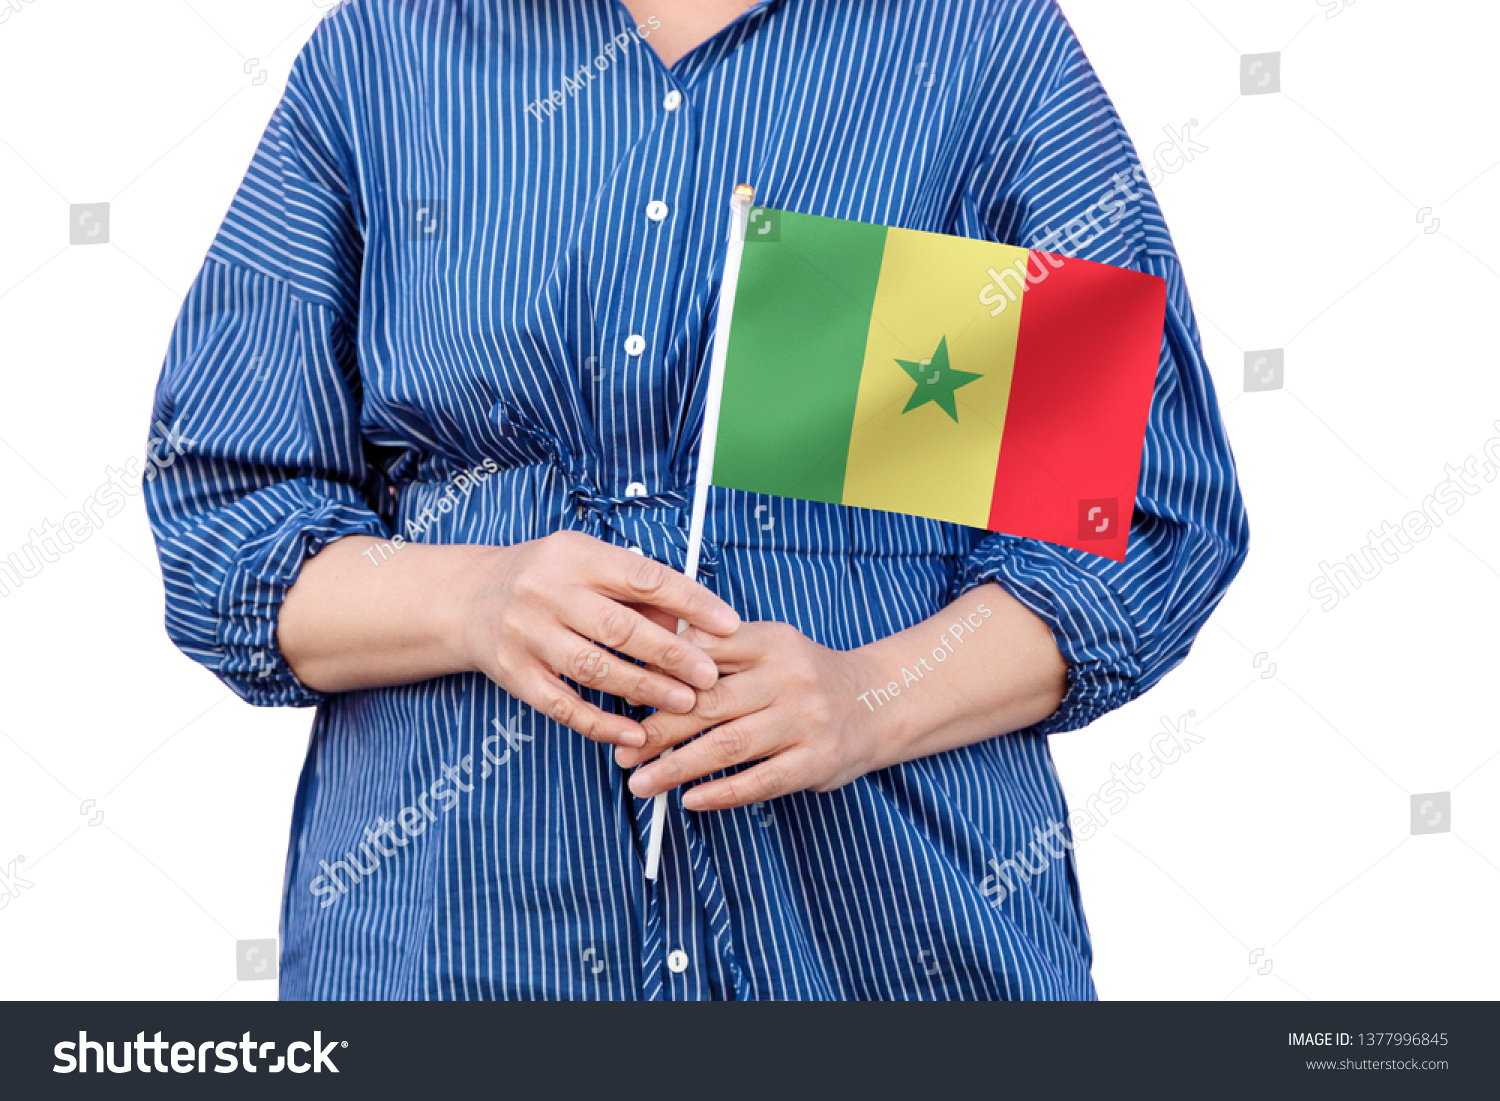 Senegal flag. Close up of woman's hands holding a national flag of Senegal isolated on white background. #1377996845